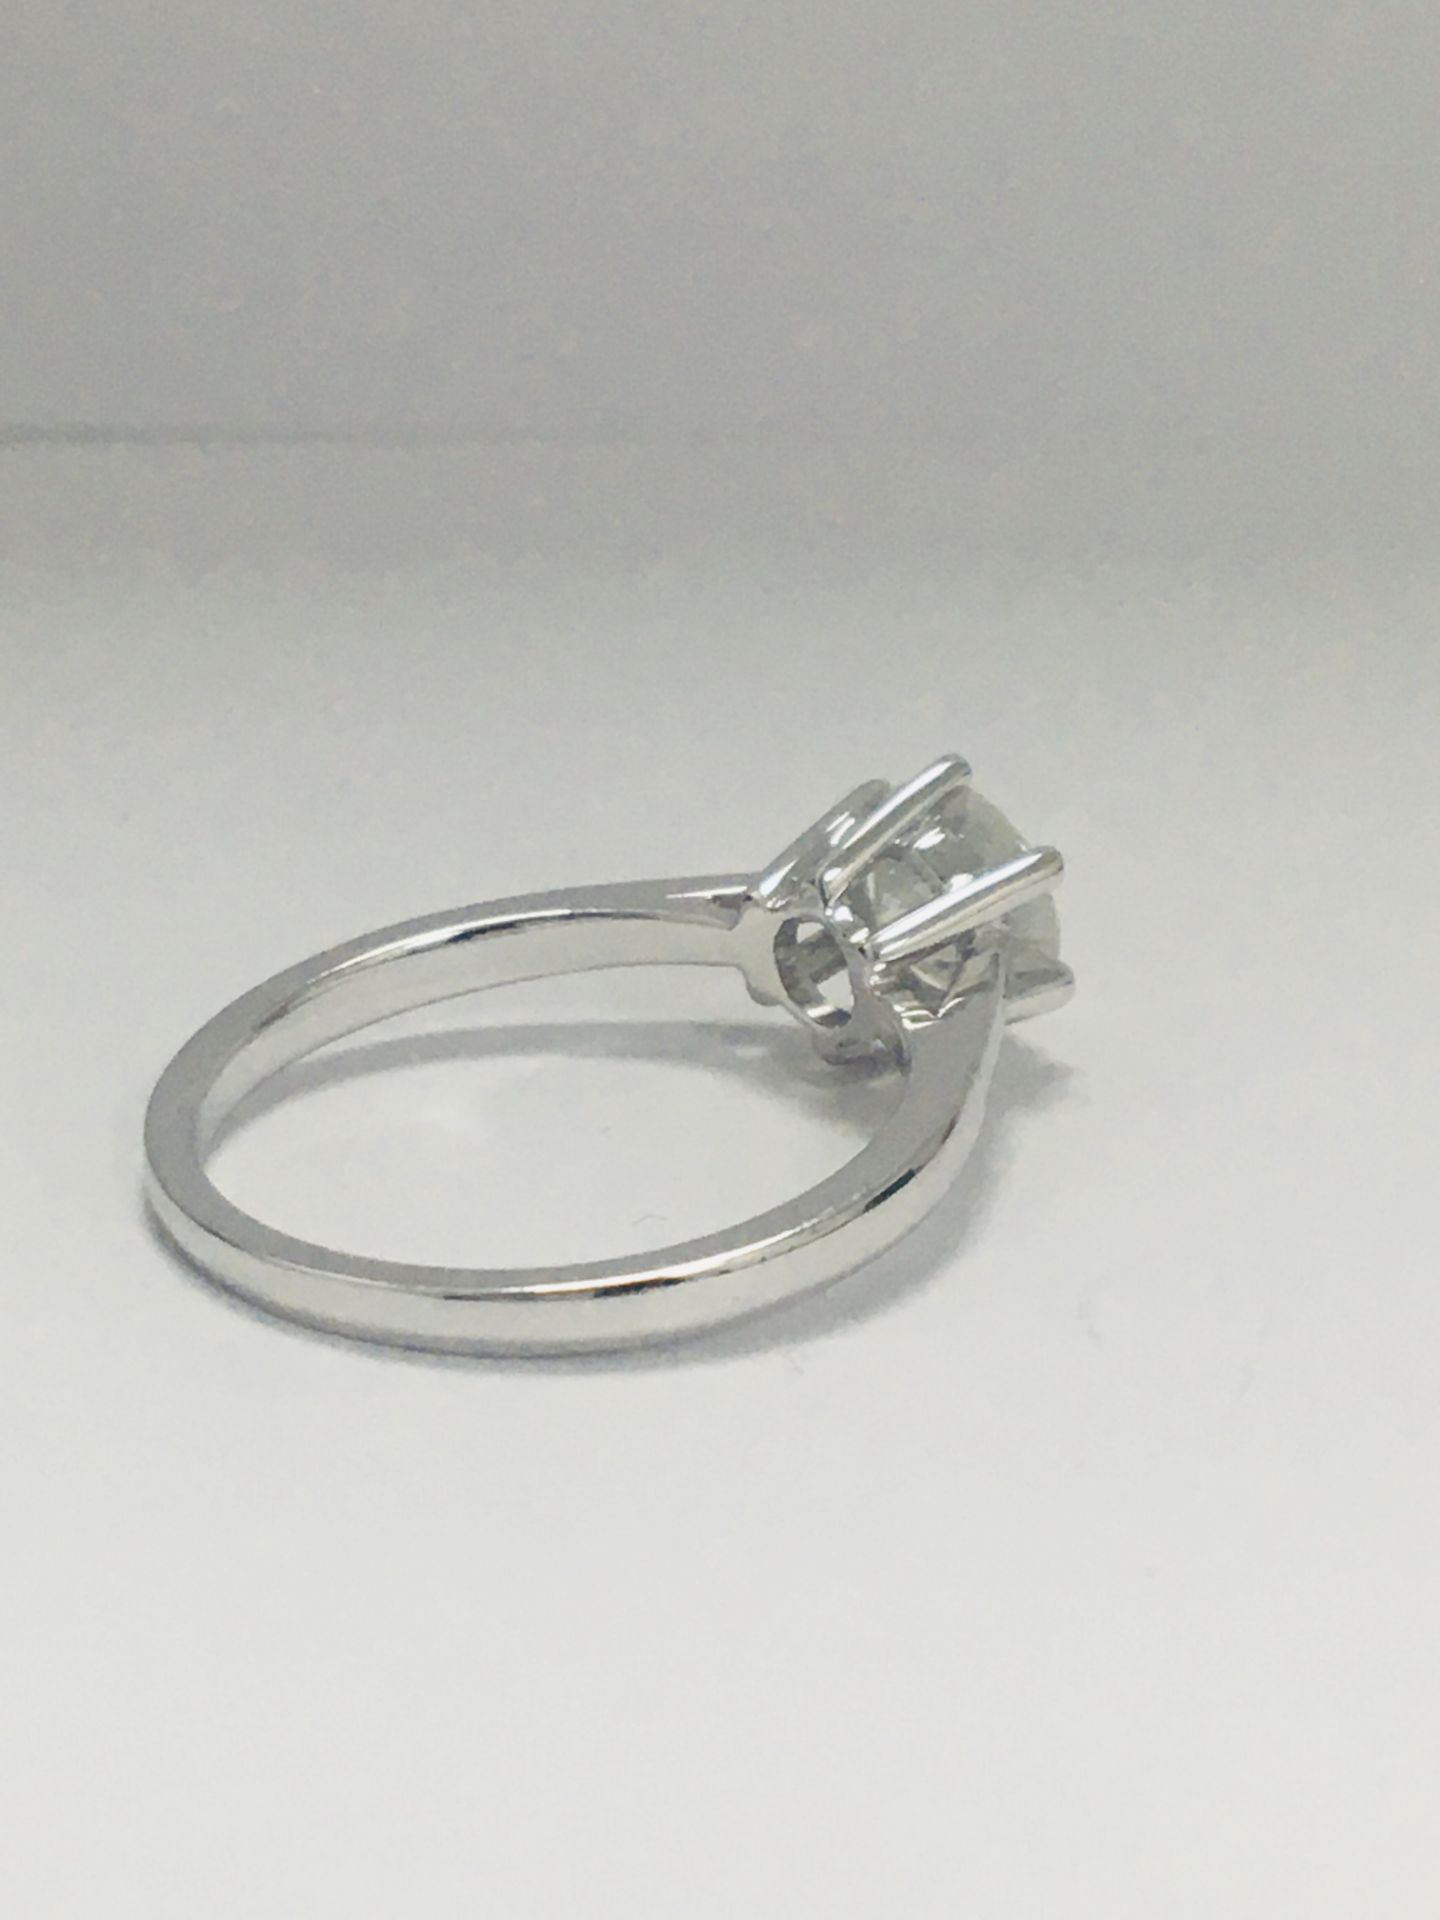 14Ct White Gold Diamond Solitaire Ring - Image 6 of 10